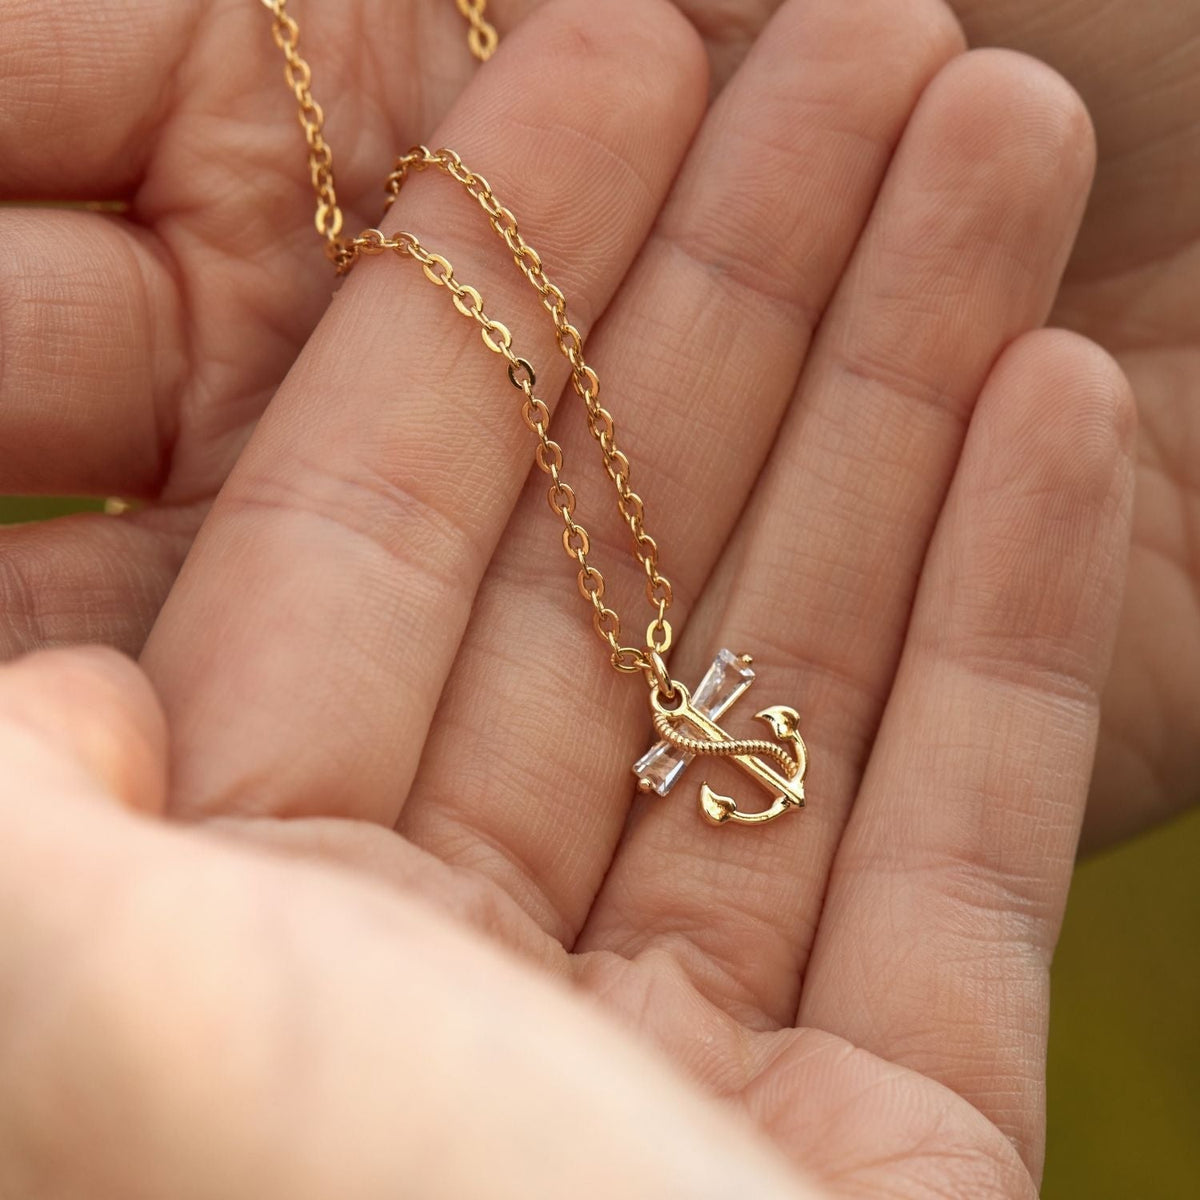 In Memory of Your Beautiful Baby | So Missed and Very Dear | Anchor Necklace